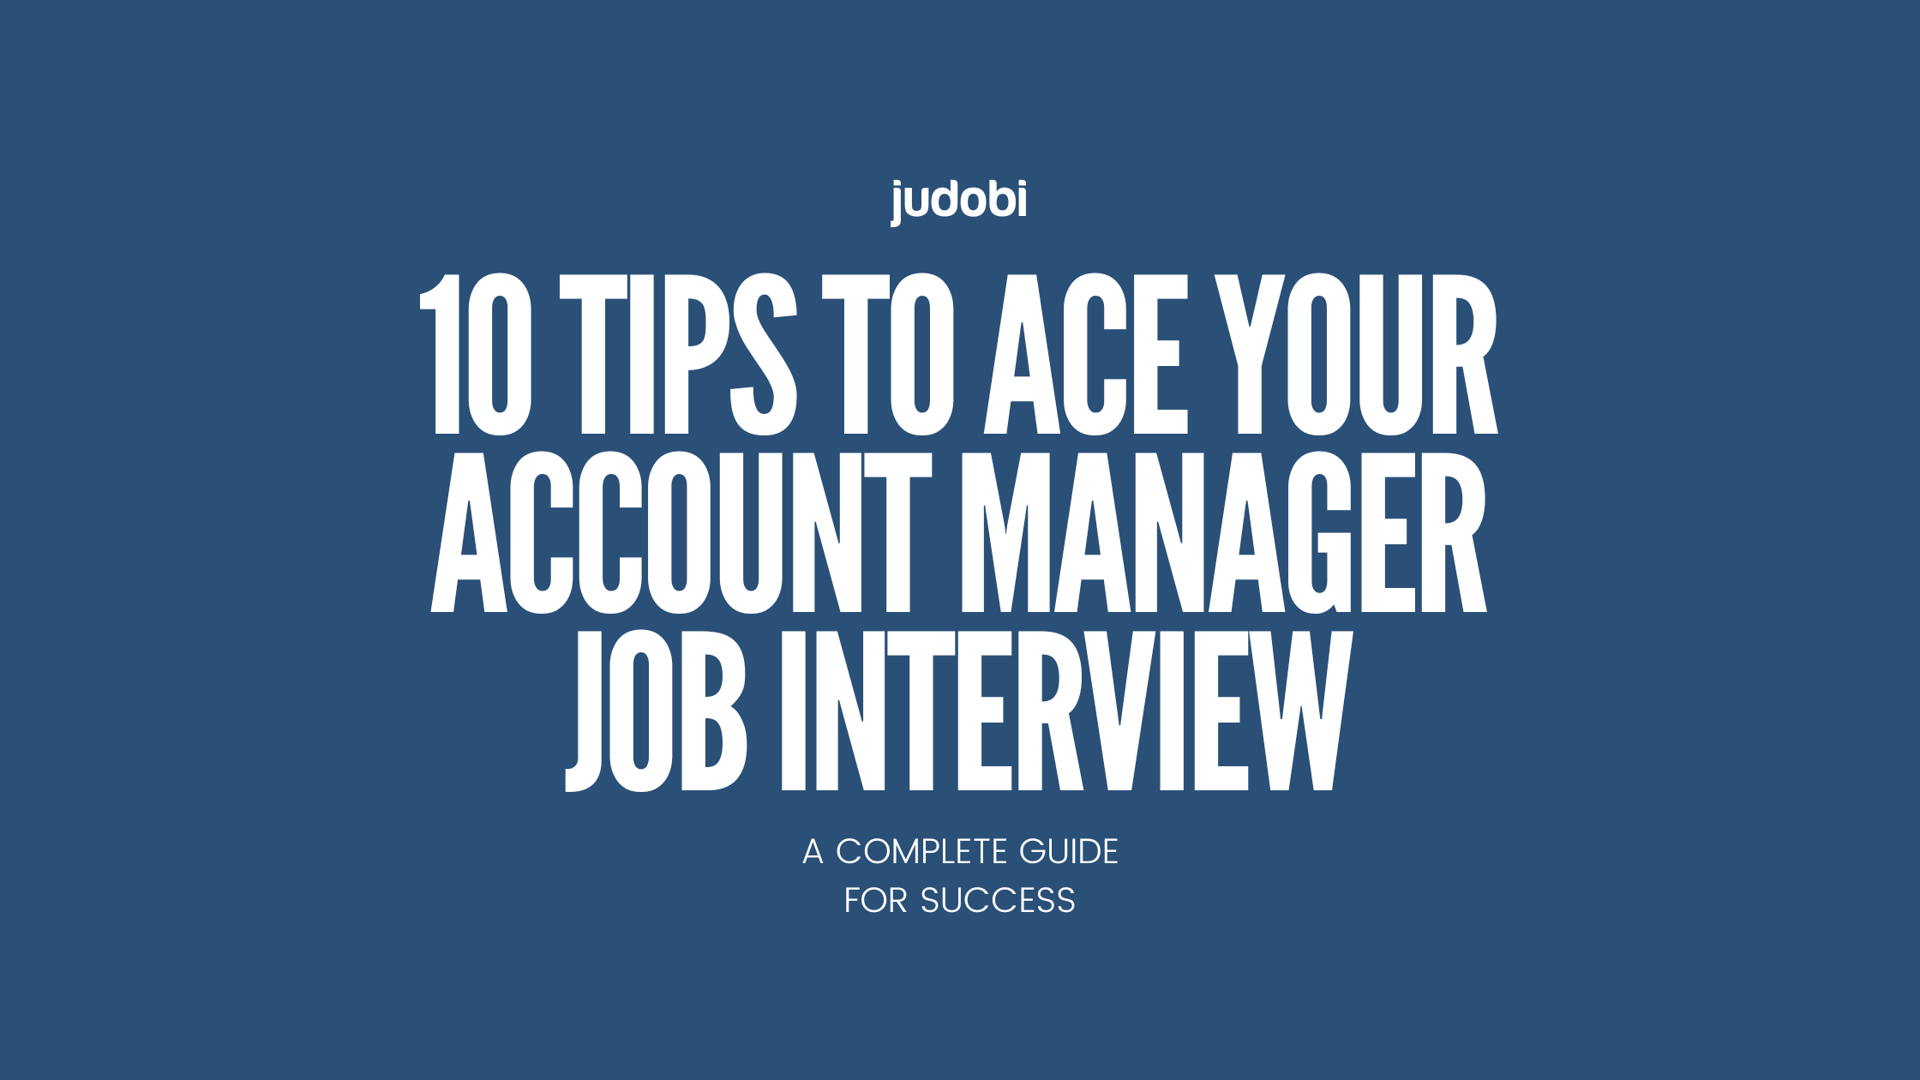 Account Manager, Helpful Tips